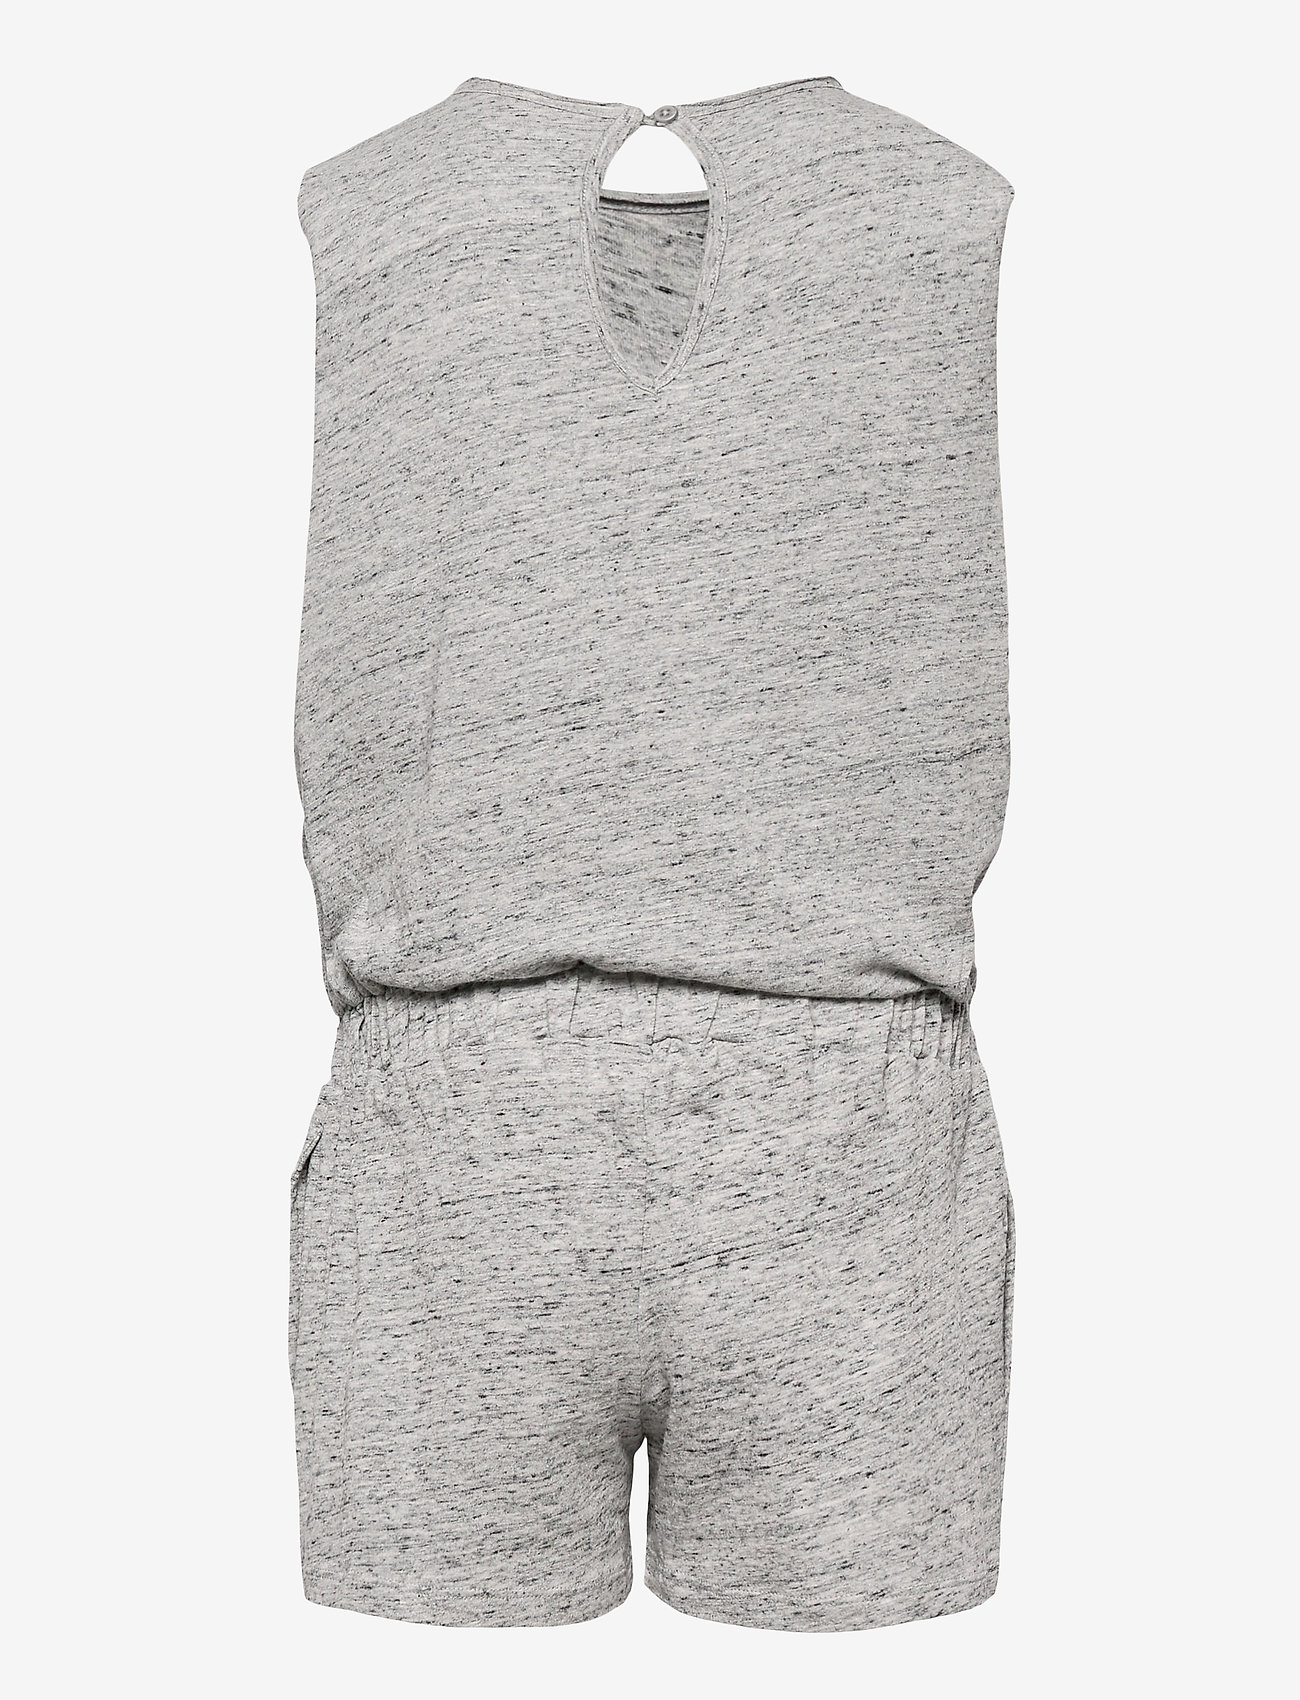 Zadig & Voltaire Kids - ALL IN ONE - chine grey - 1